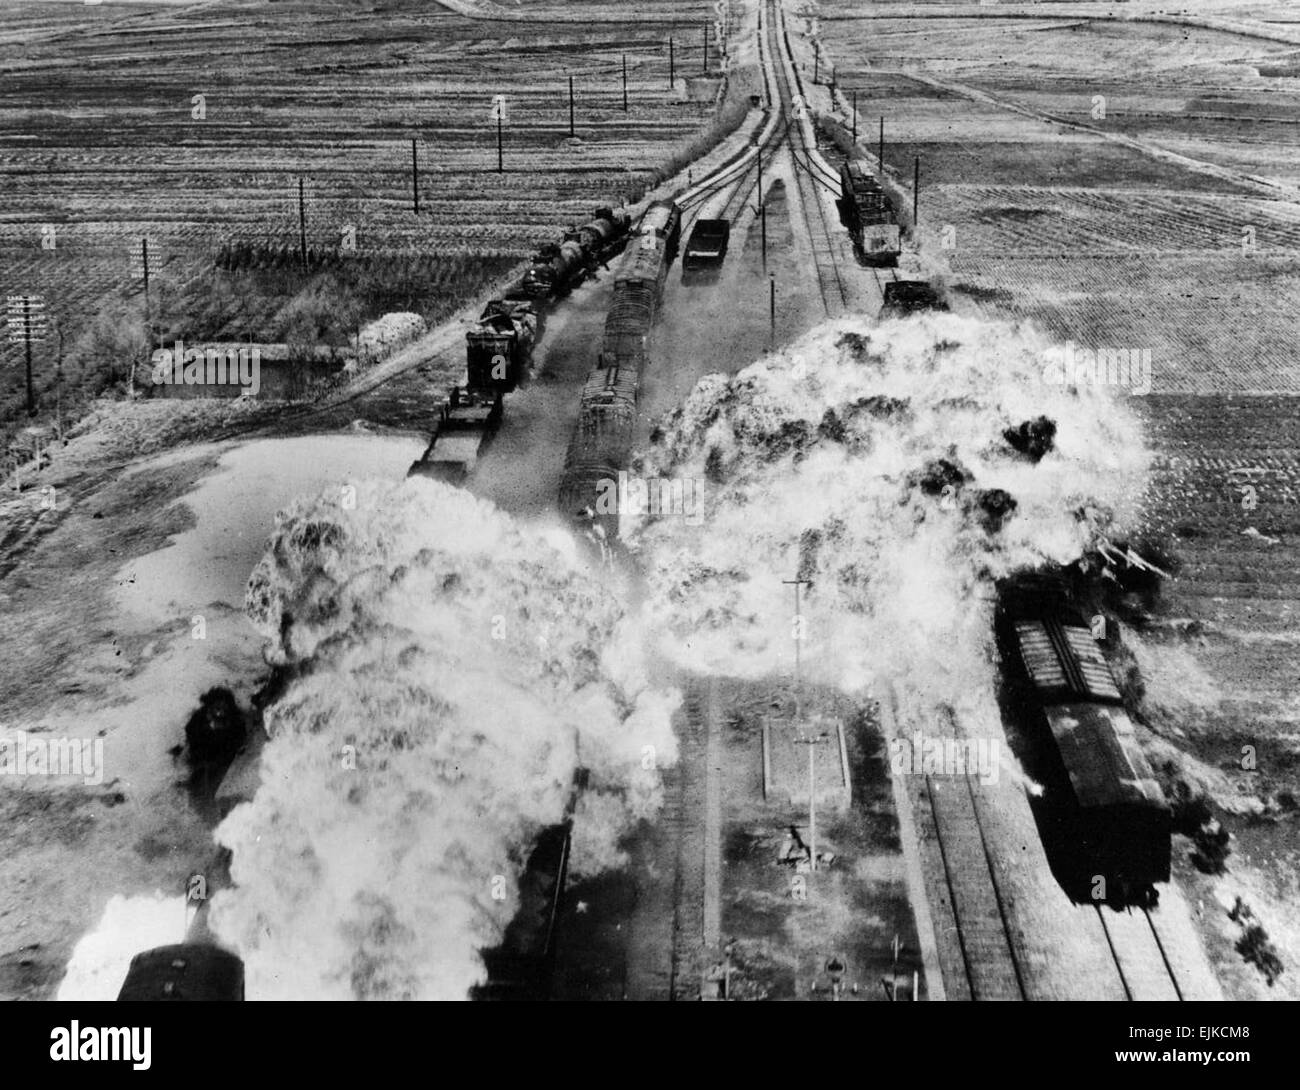 Korean War railroad attack  USAMHI August 19, 2007  While the military kept America's railroads running under Truman, it sought the opposite elsewhere. Here, the Fifth Air Force's 452nd Light Bomb Wing drops napalm on rail cars south of Wonsan, North Korea, an east coast port city, circa 1950-51. Stock Photo